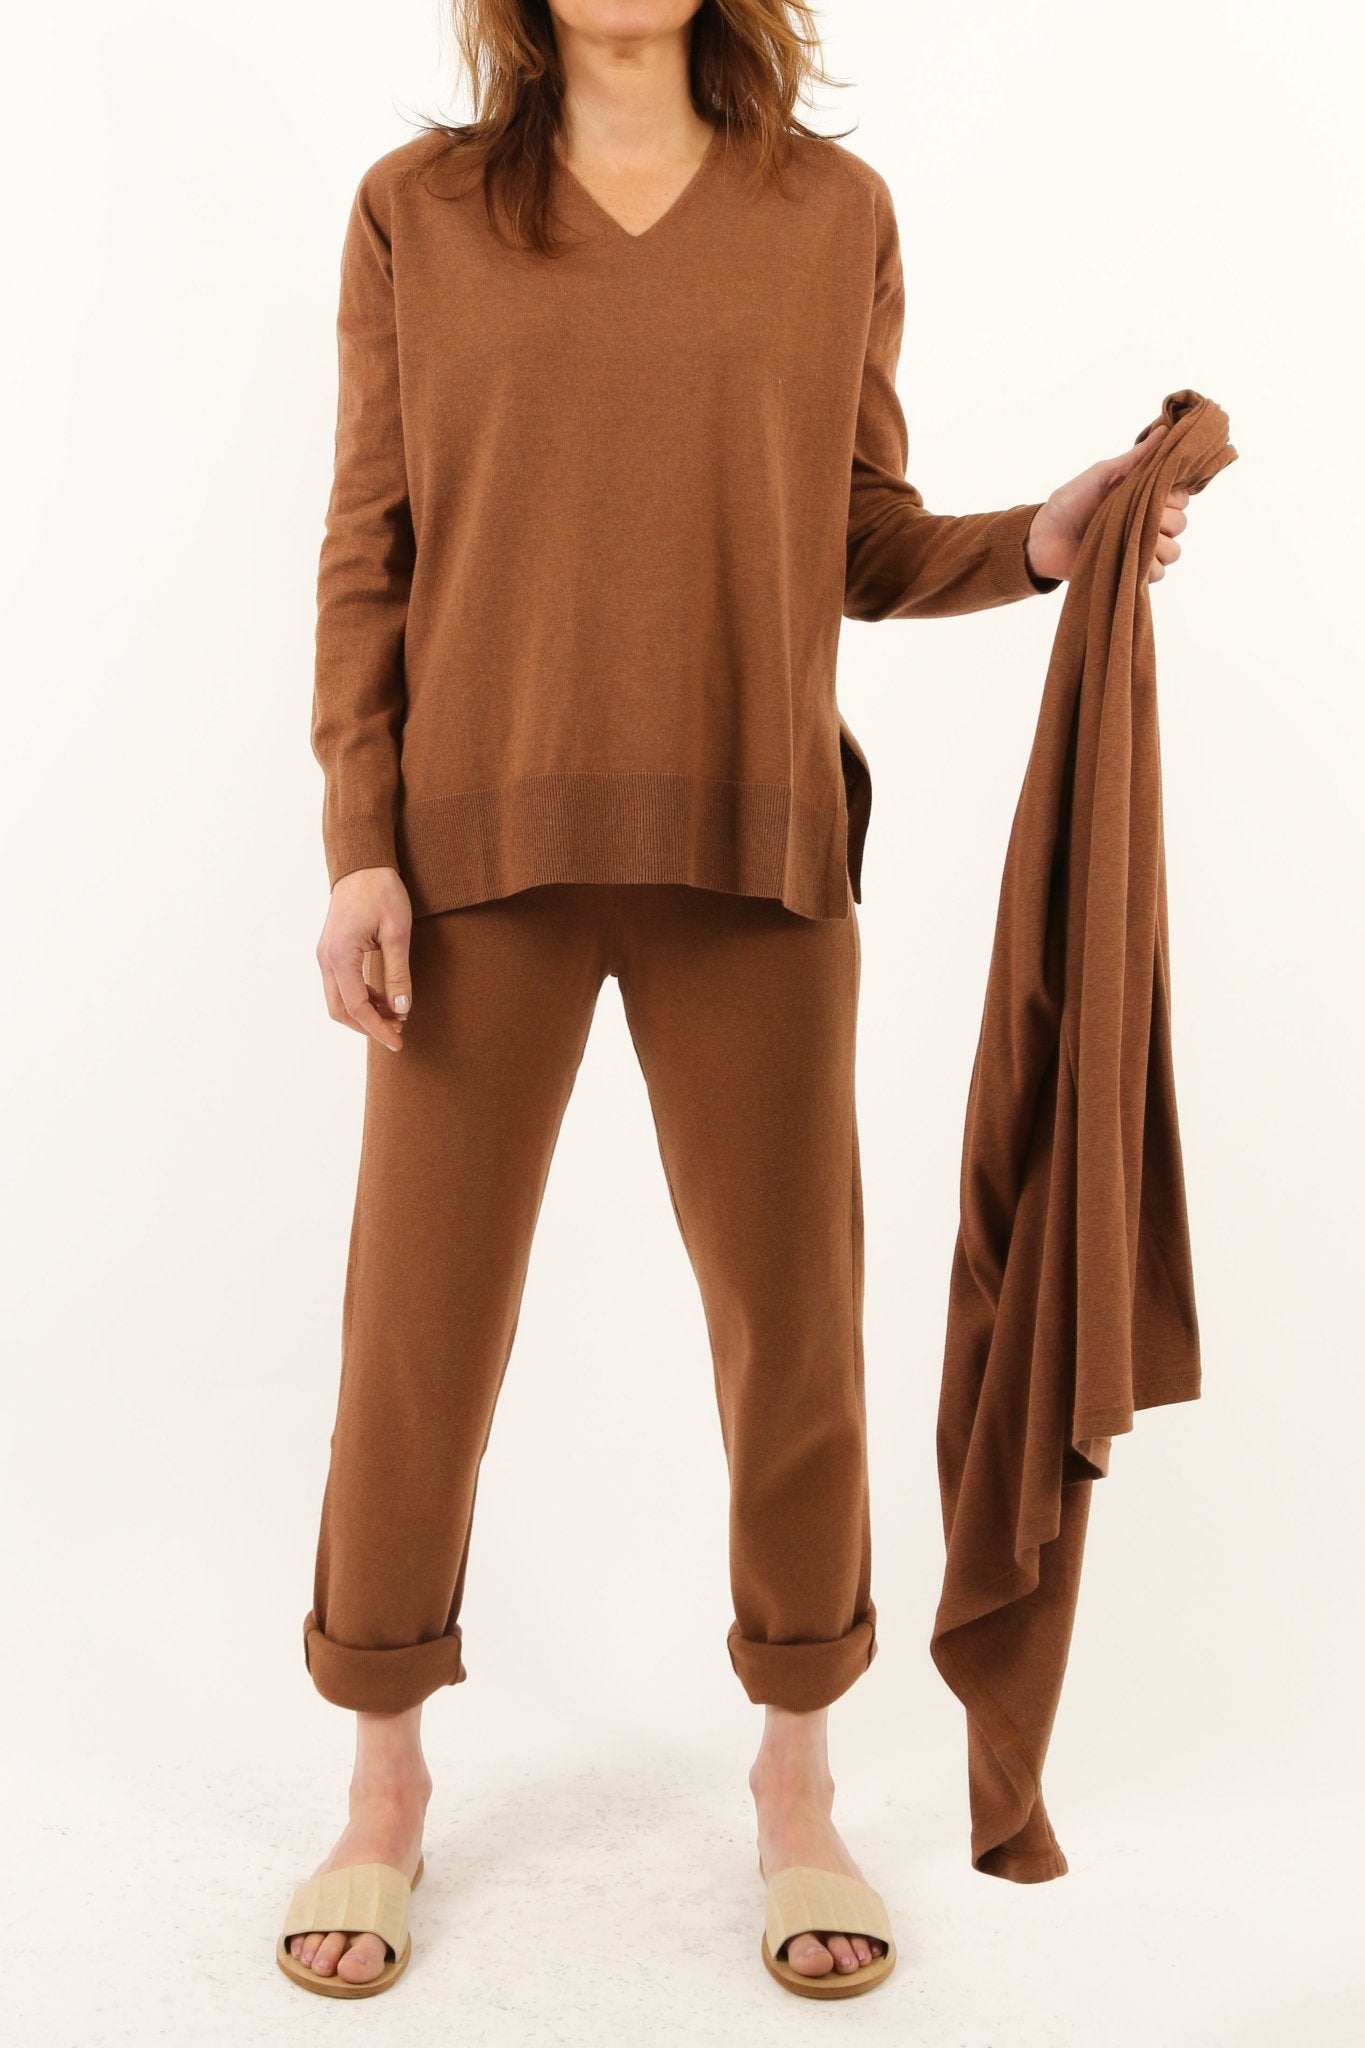 AVERY V NECK TUNIC IN DOUBLE KNIT PIMA COTTON IN SADDLE BROWN HEATHER - Jarbo